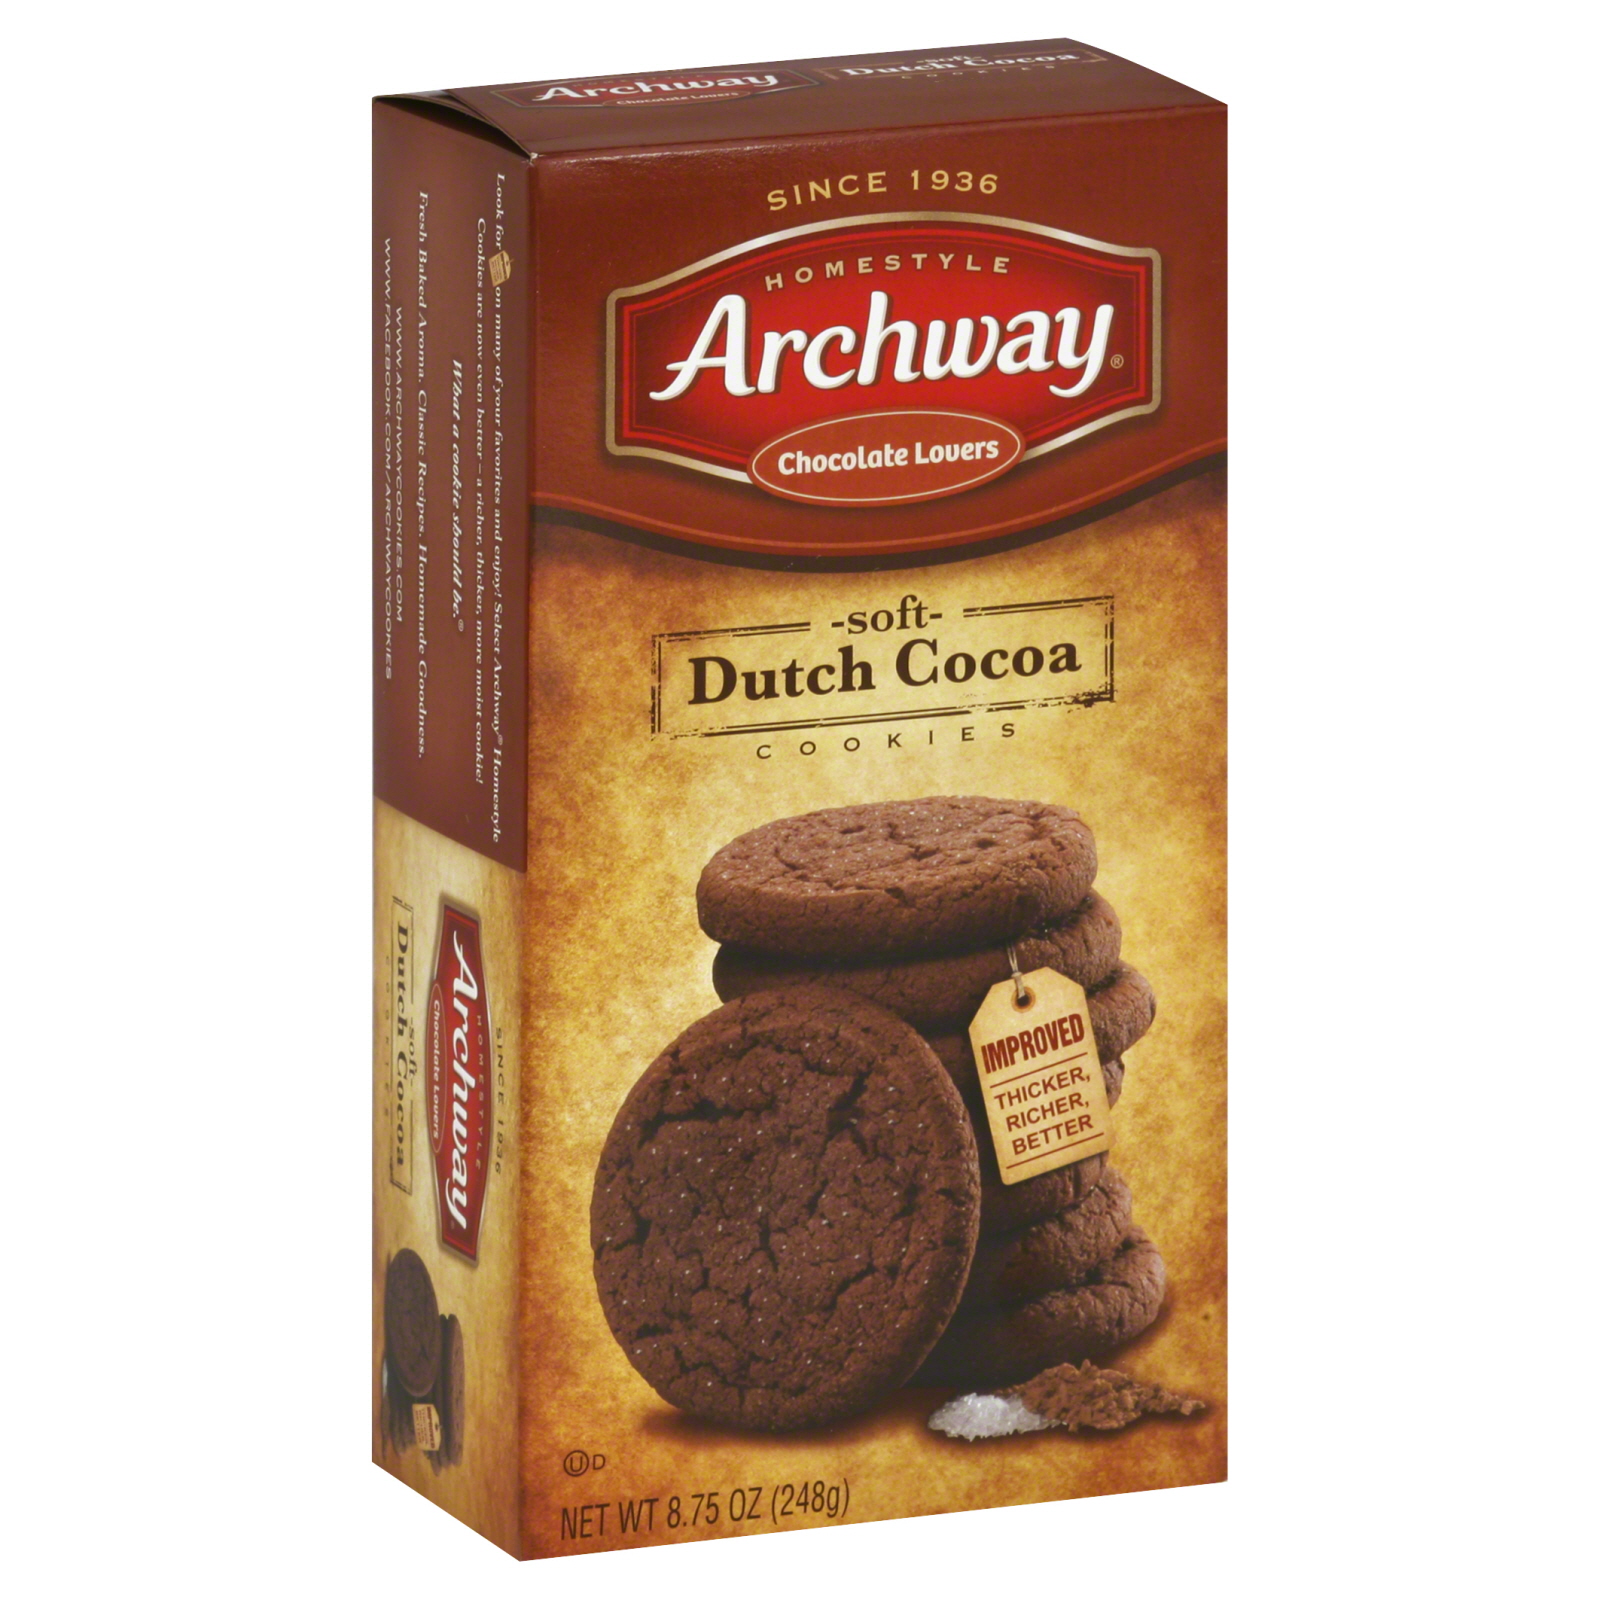 Archway Home Style Cookies, Dutch Cocoa, Original, 8.75 oz (248 g)